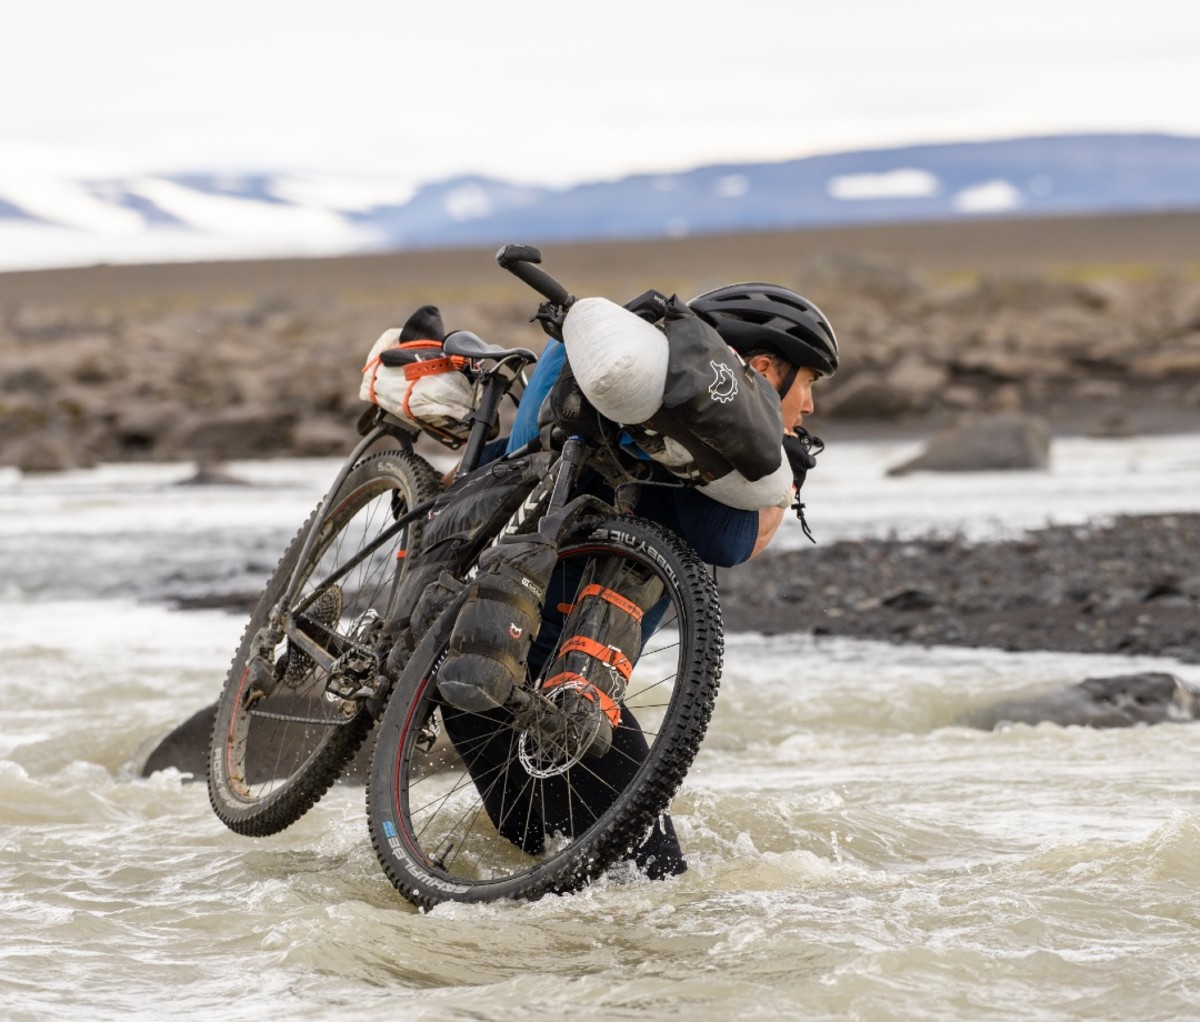 Chris Burkard carrying his bike and gear across a river.